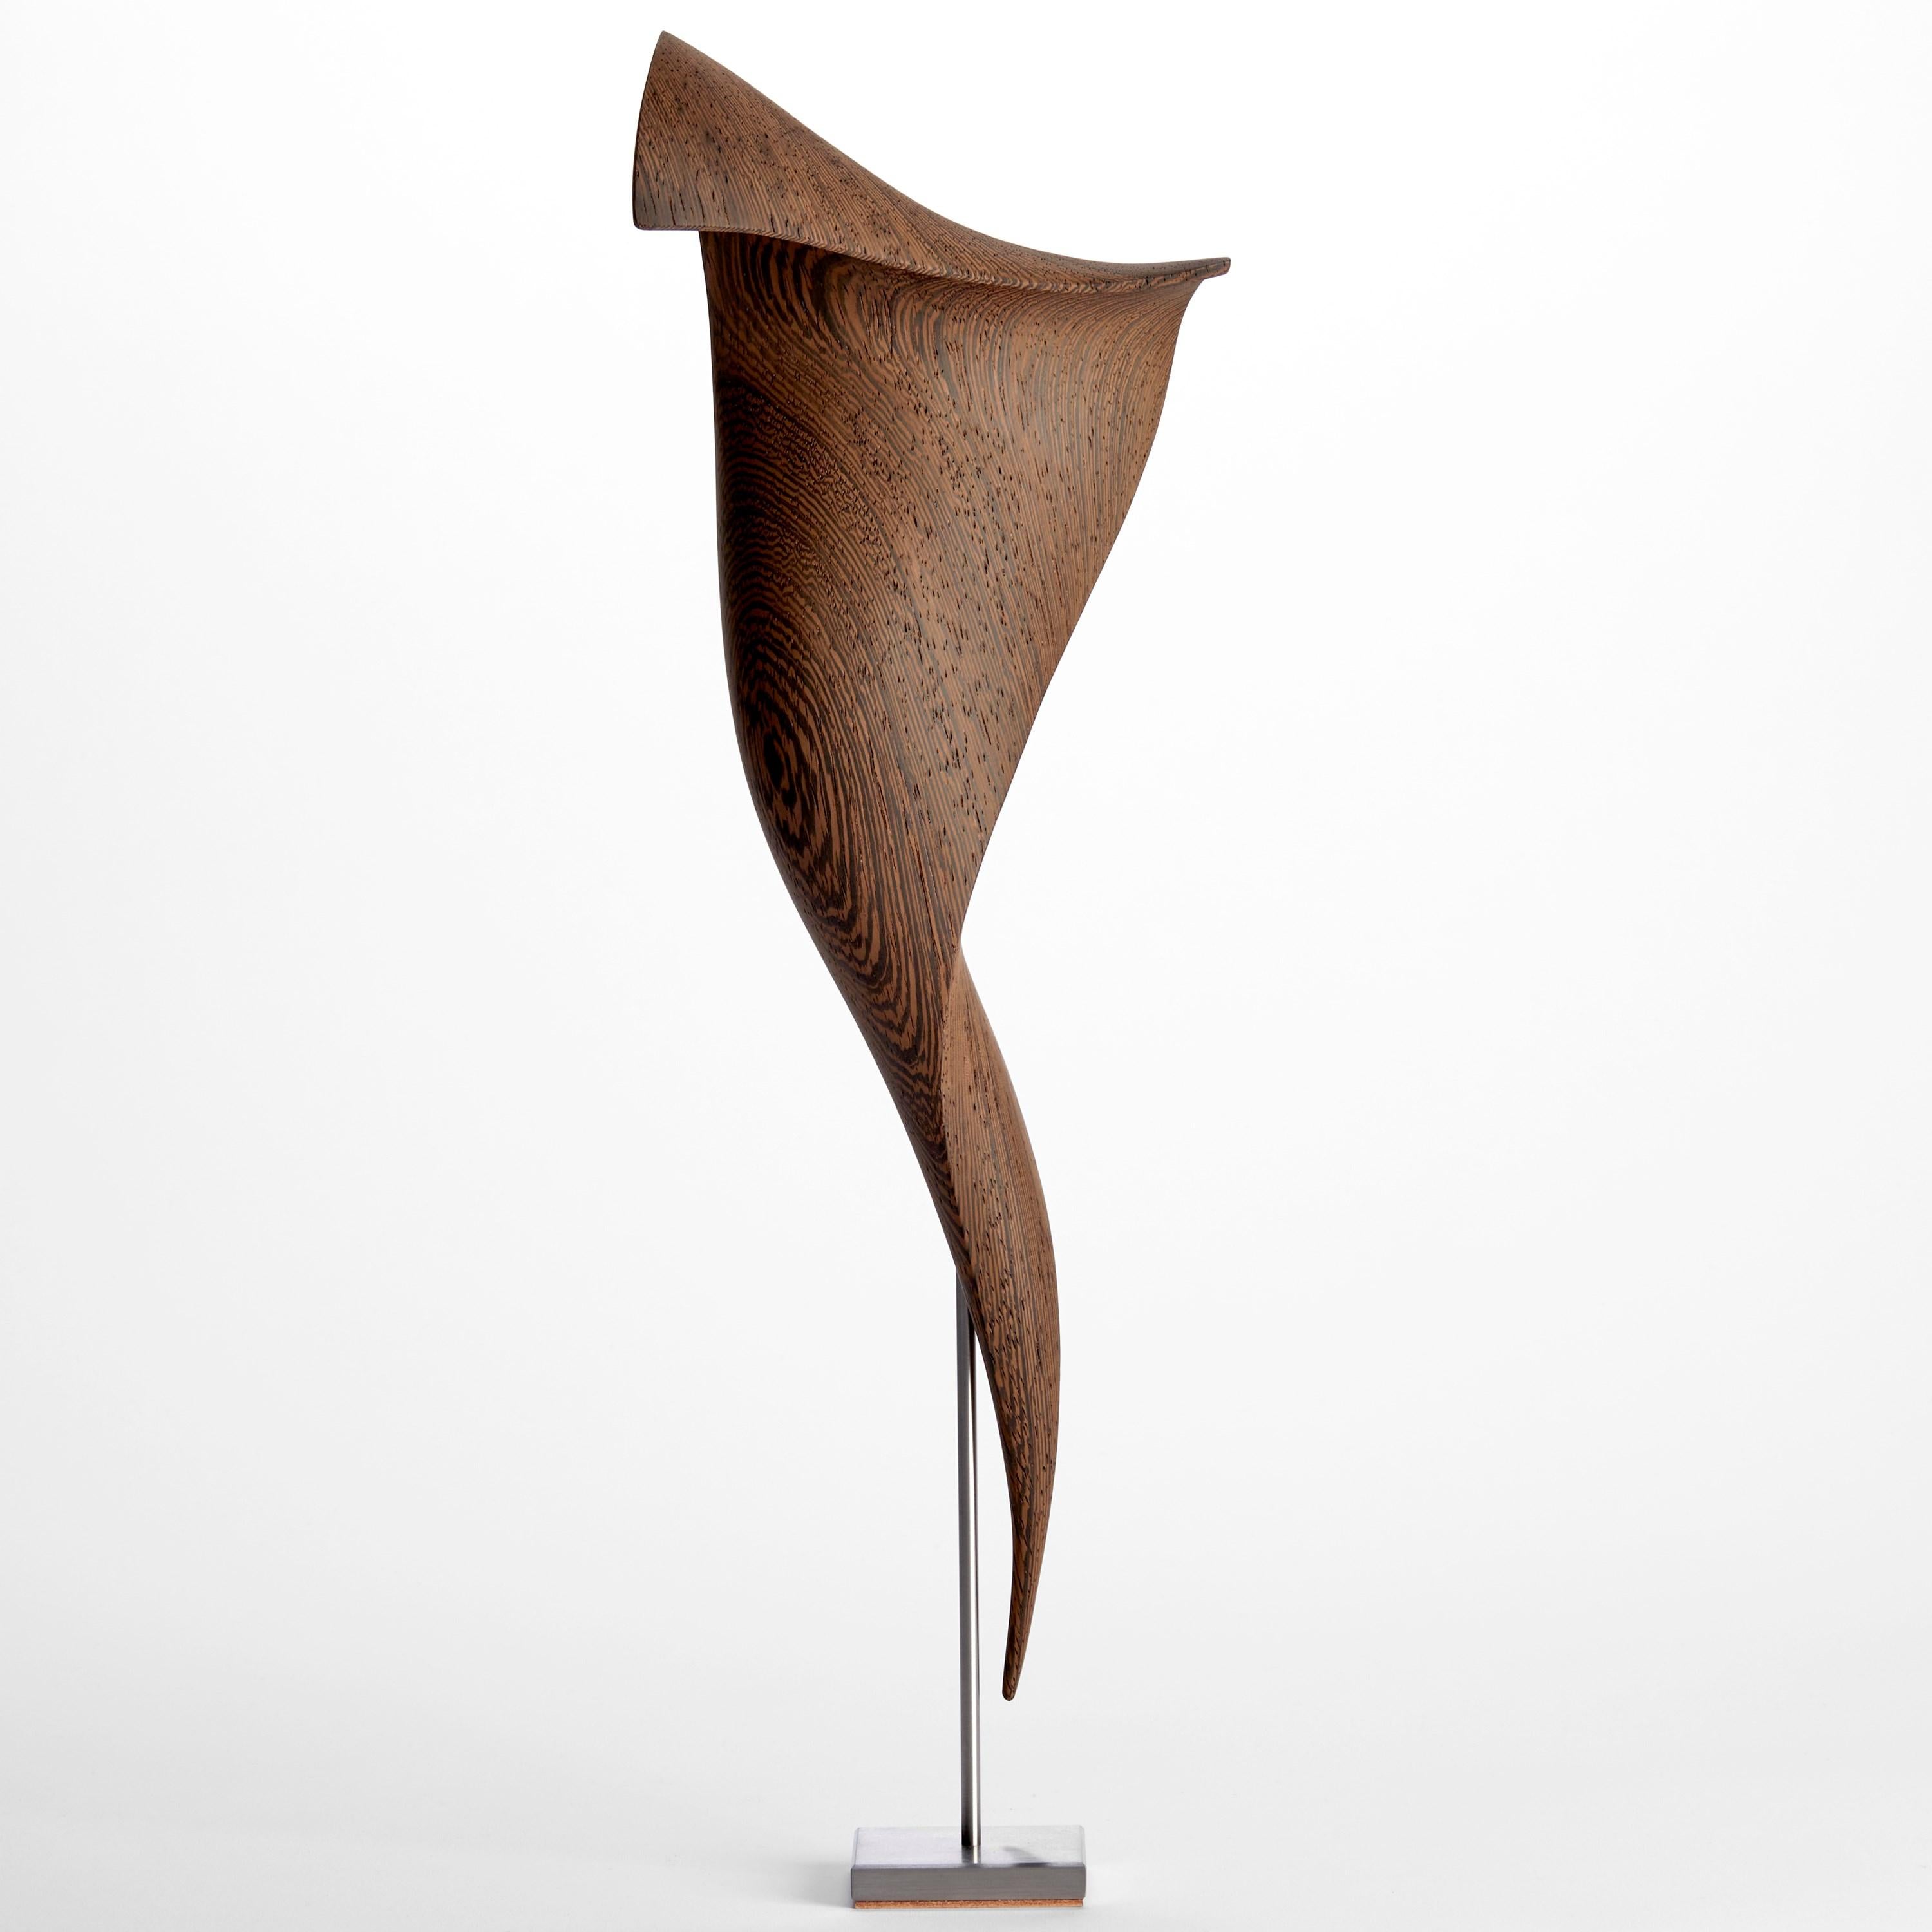 'Flow Petit No 22' is a unique artwork by the Danish artists, Egeværk. It is created from Wengé sourced from Africa - Congo and Cameroon - (wood, FSC* certified) with a stainless steel foot. Signed on the base.

The Flow Series created by Egeværk